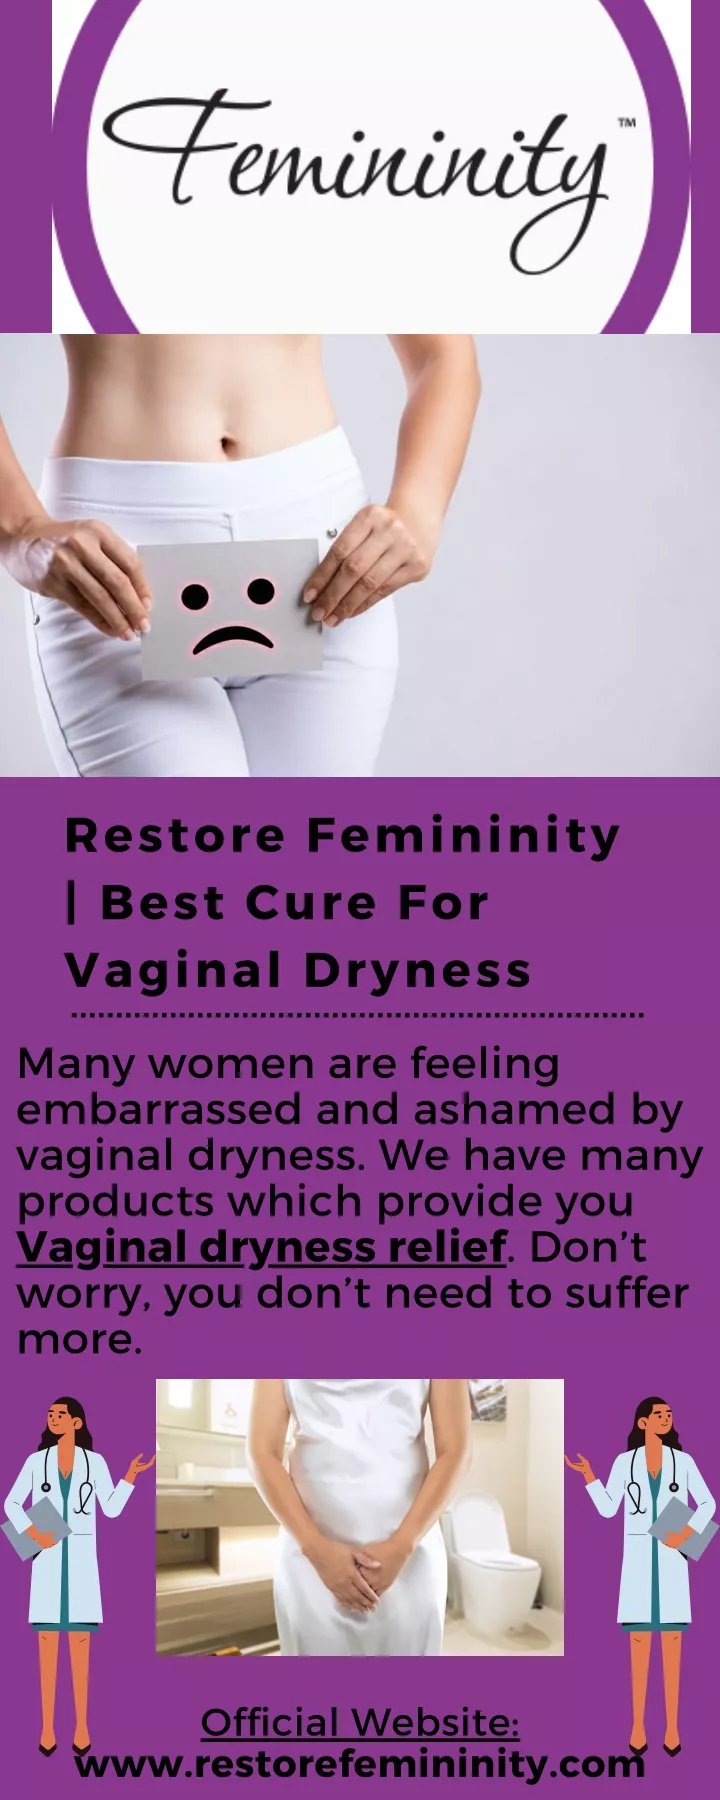 Ppt Restore Femininity Best Cure For Vaginal Dryness Powerpoint Presentation Id11294693 